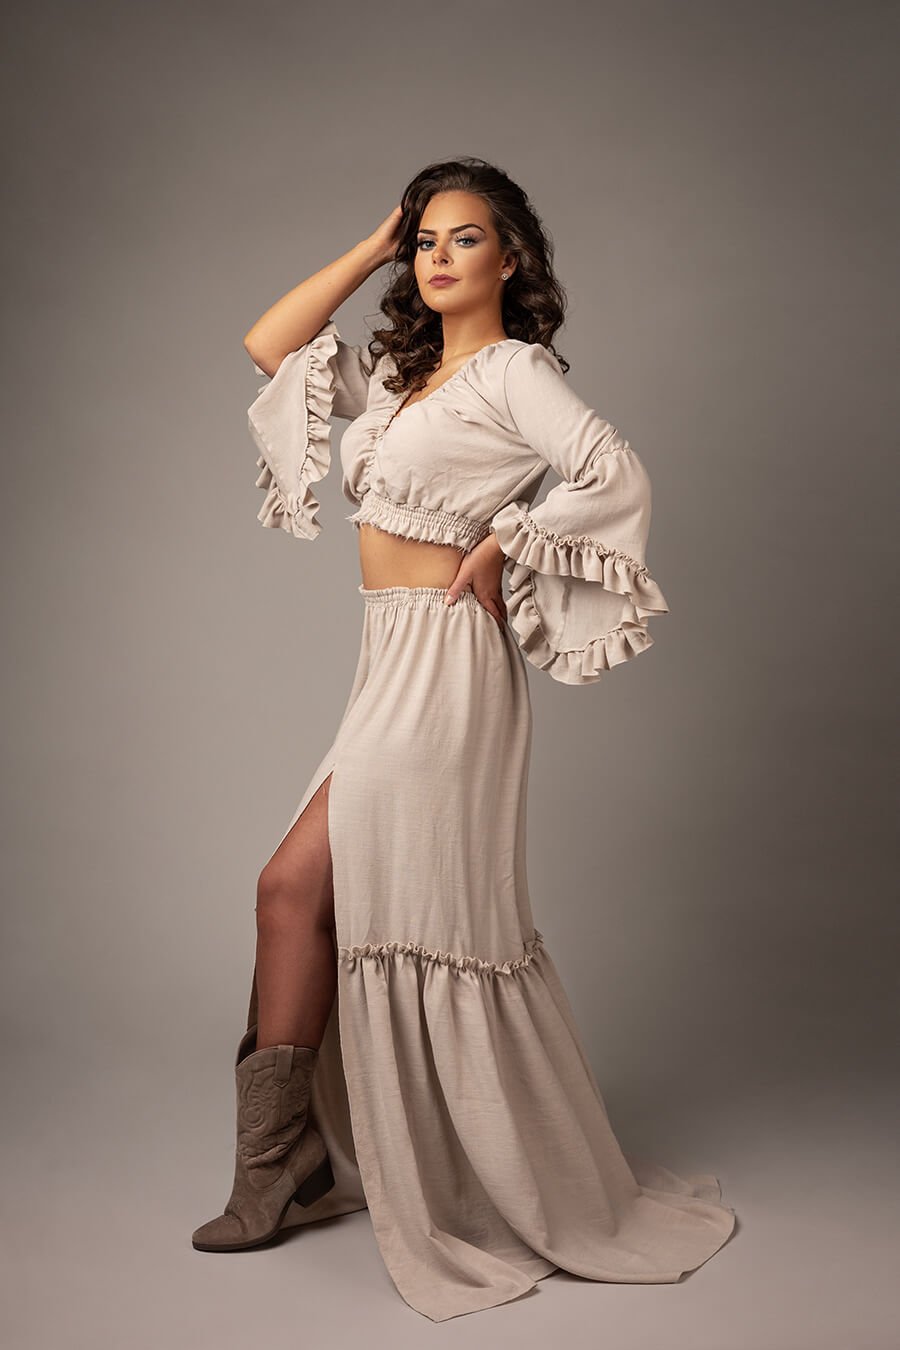 brunette model poses in a studio for a boho western chic photoshoot. she wears a ecru color set with a lot of ruffles on the top and the skirt. she wears boots to match the style.